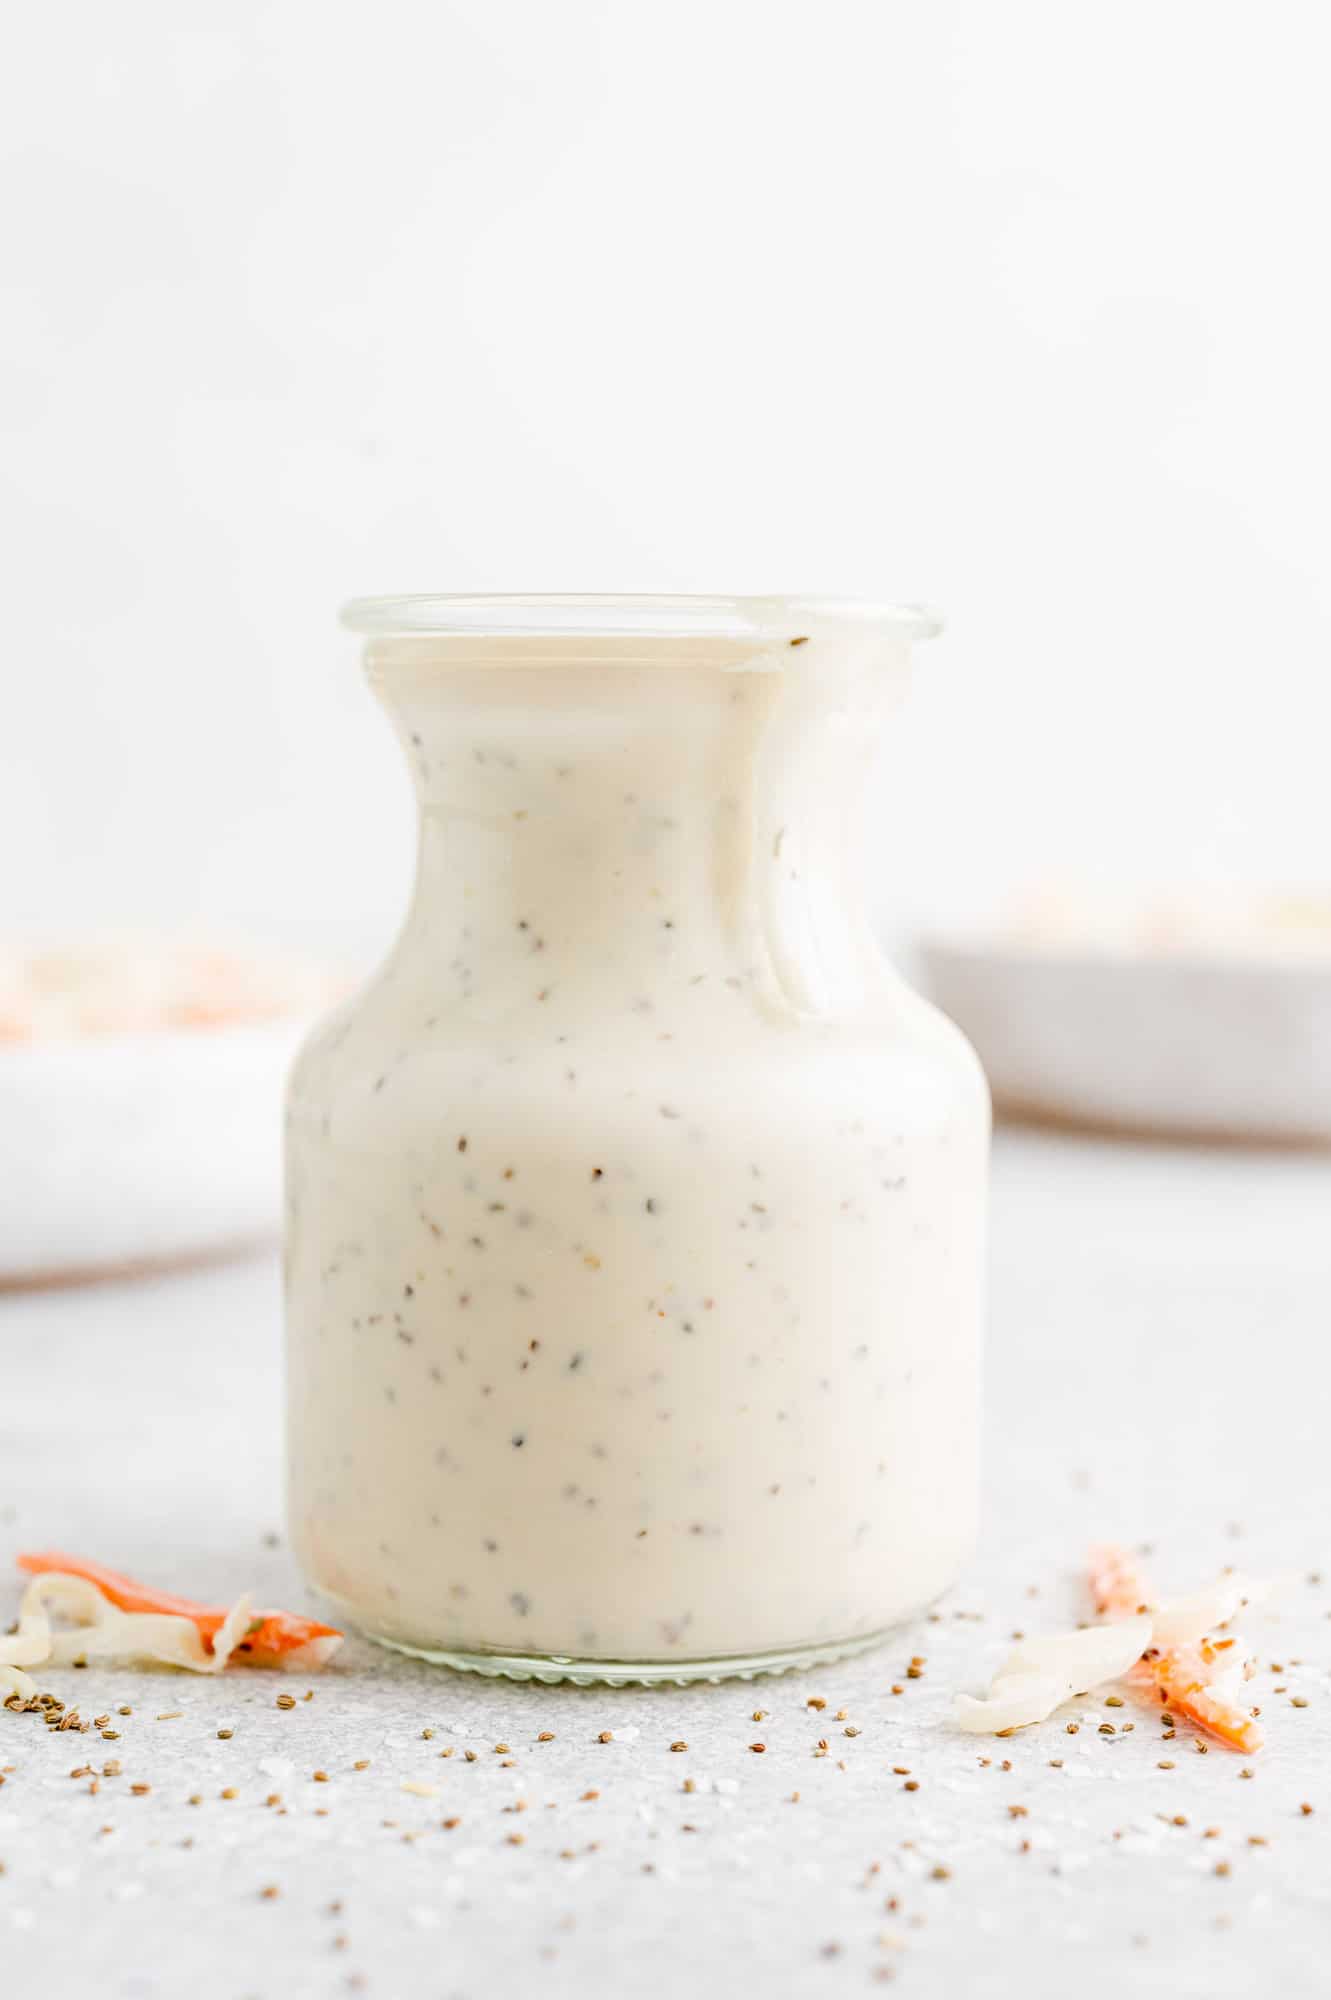 Coleslaw dressing in a small jar.